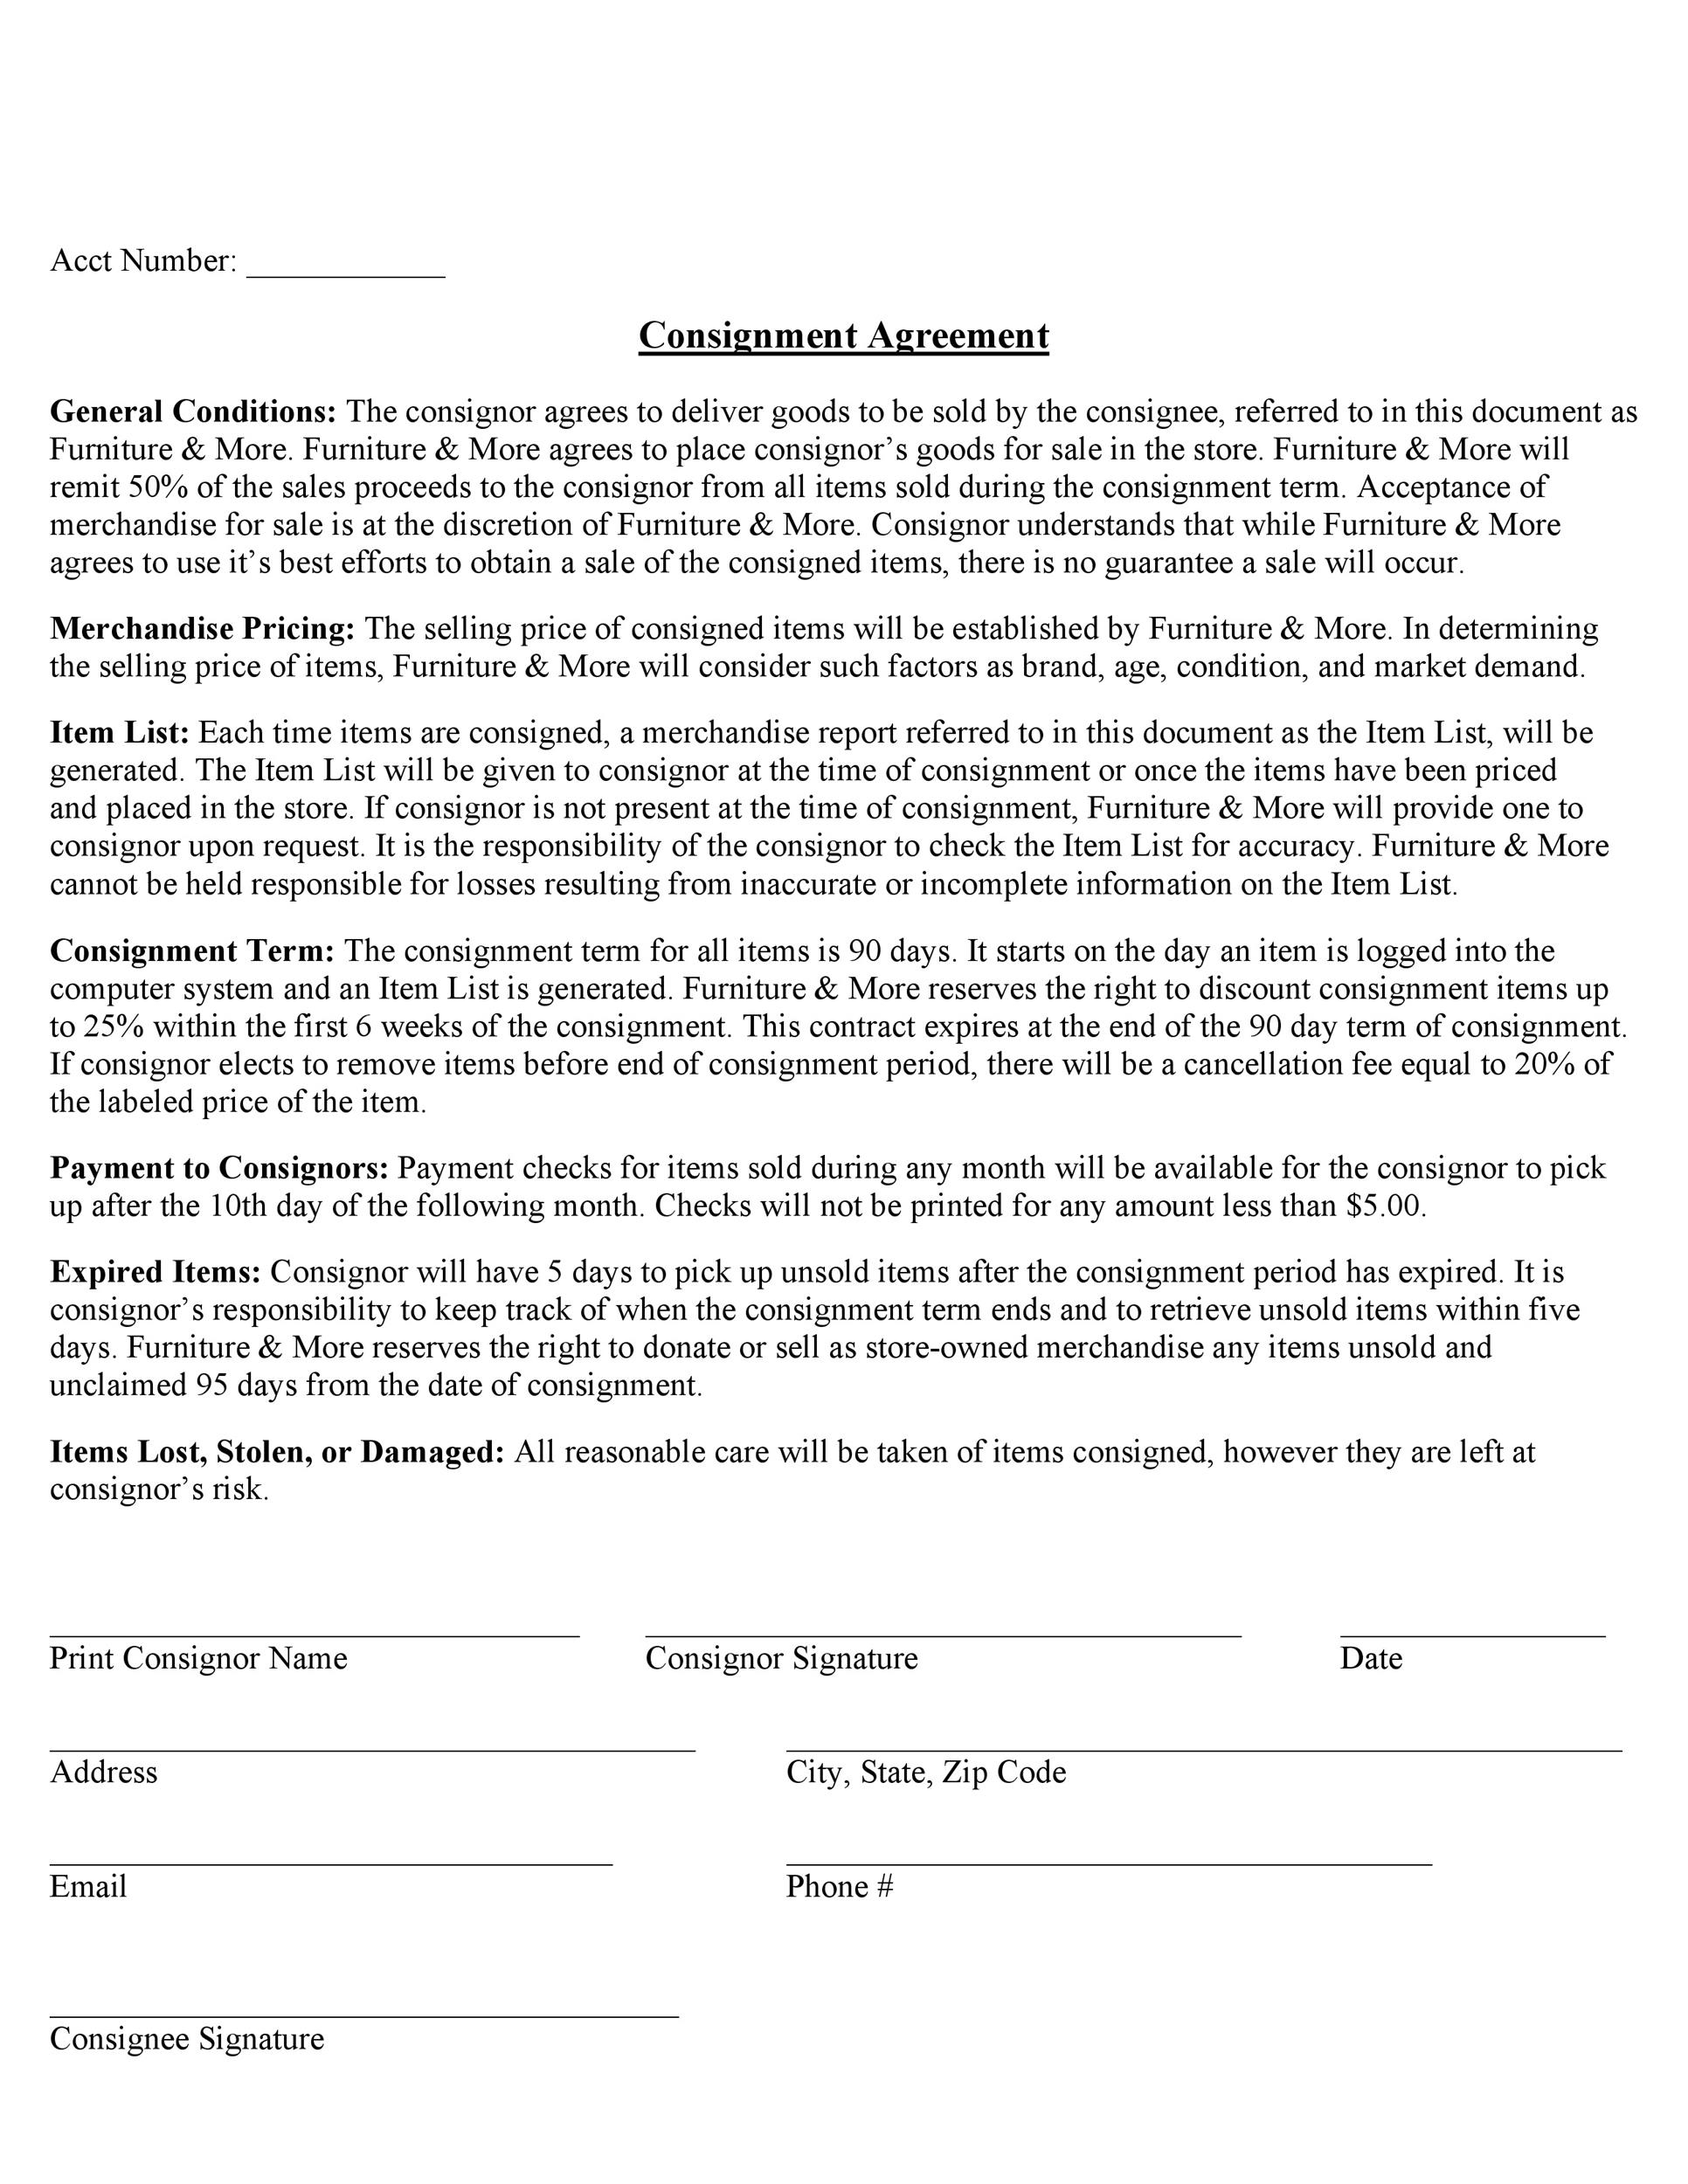 Free Consignment Agreement Template 37